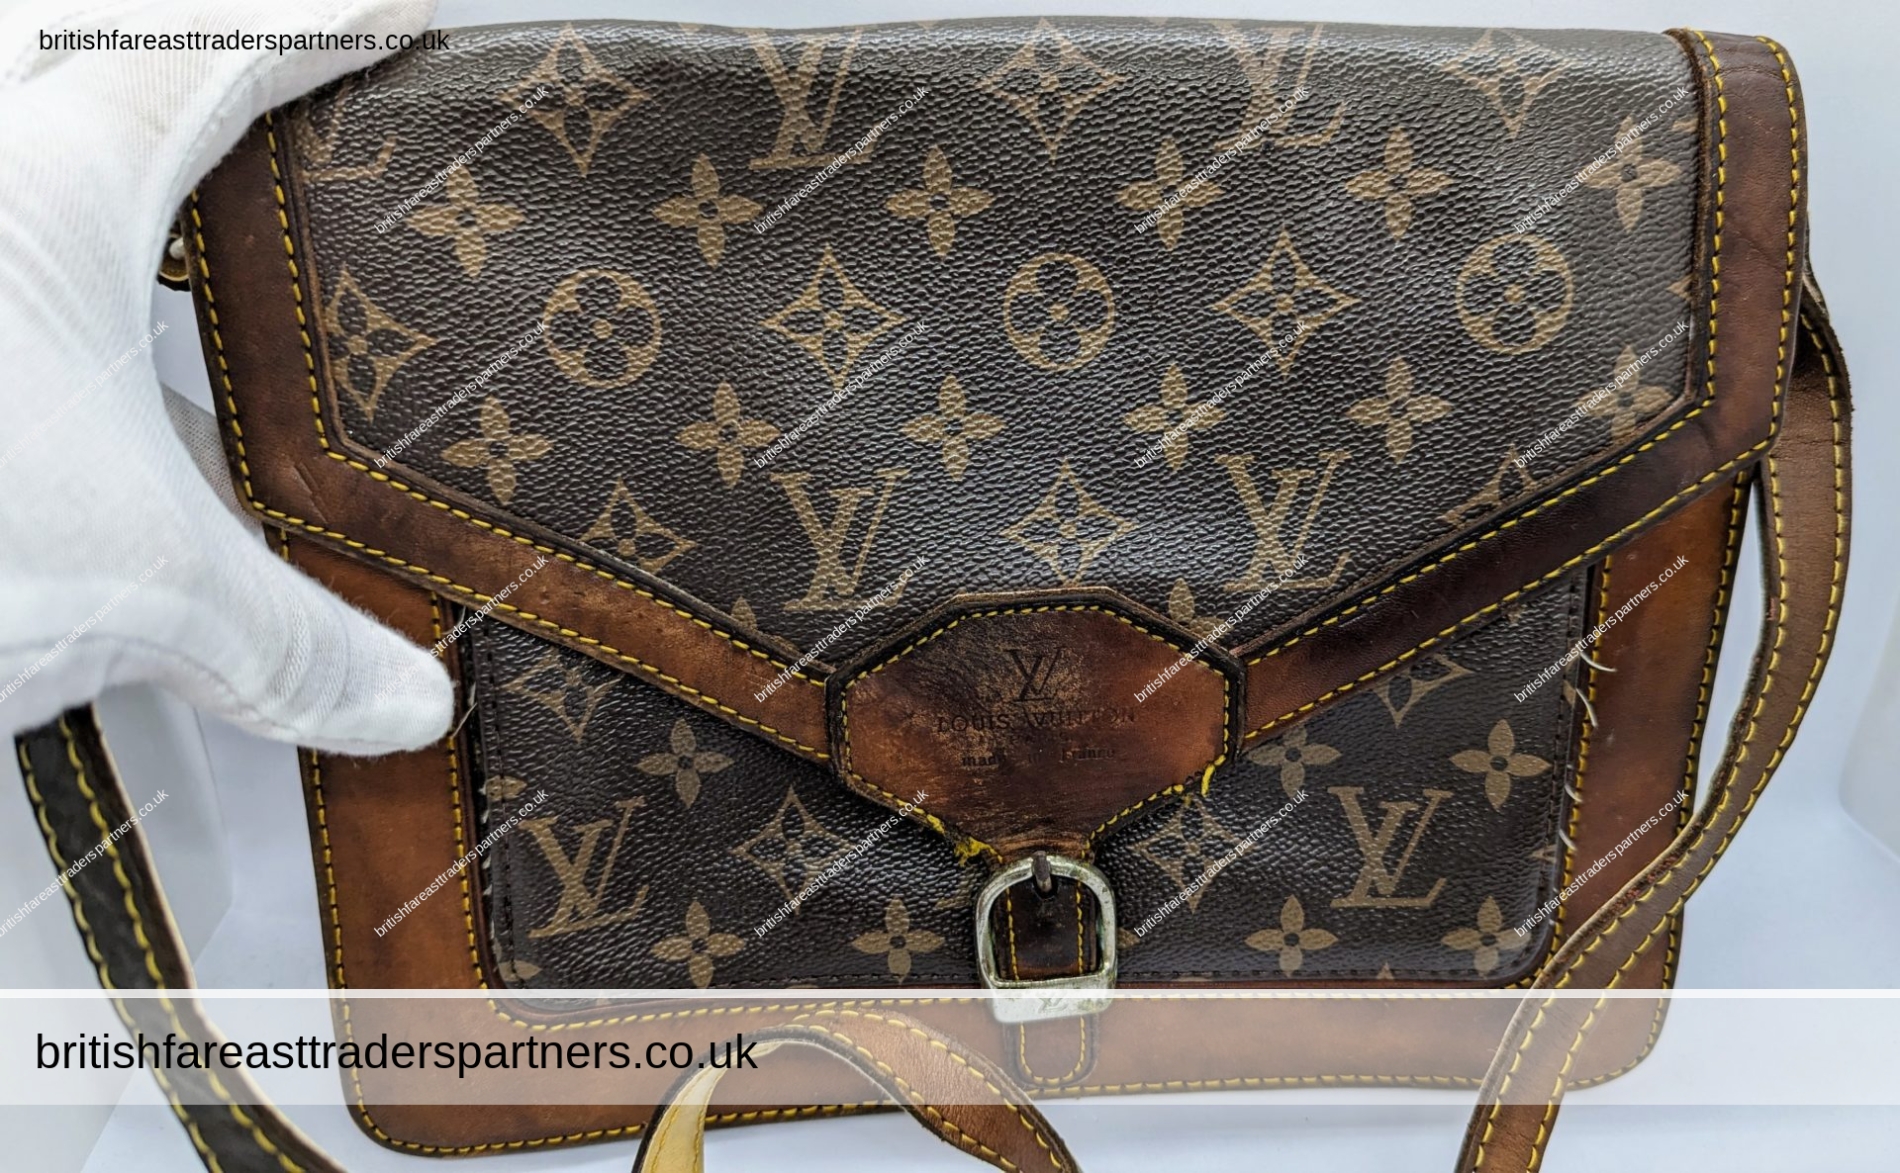 Pin by Santiago on Luxuries  Louis vuitton duffle bag, Louis vuitton bag, Louis  vuitton